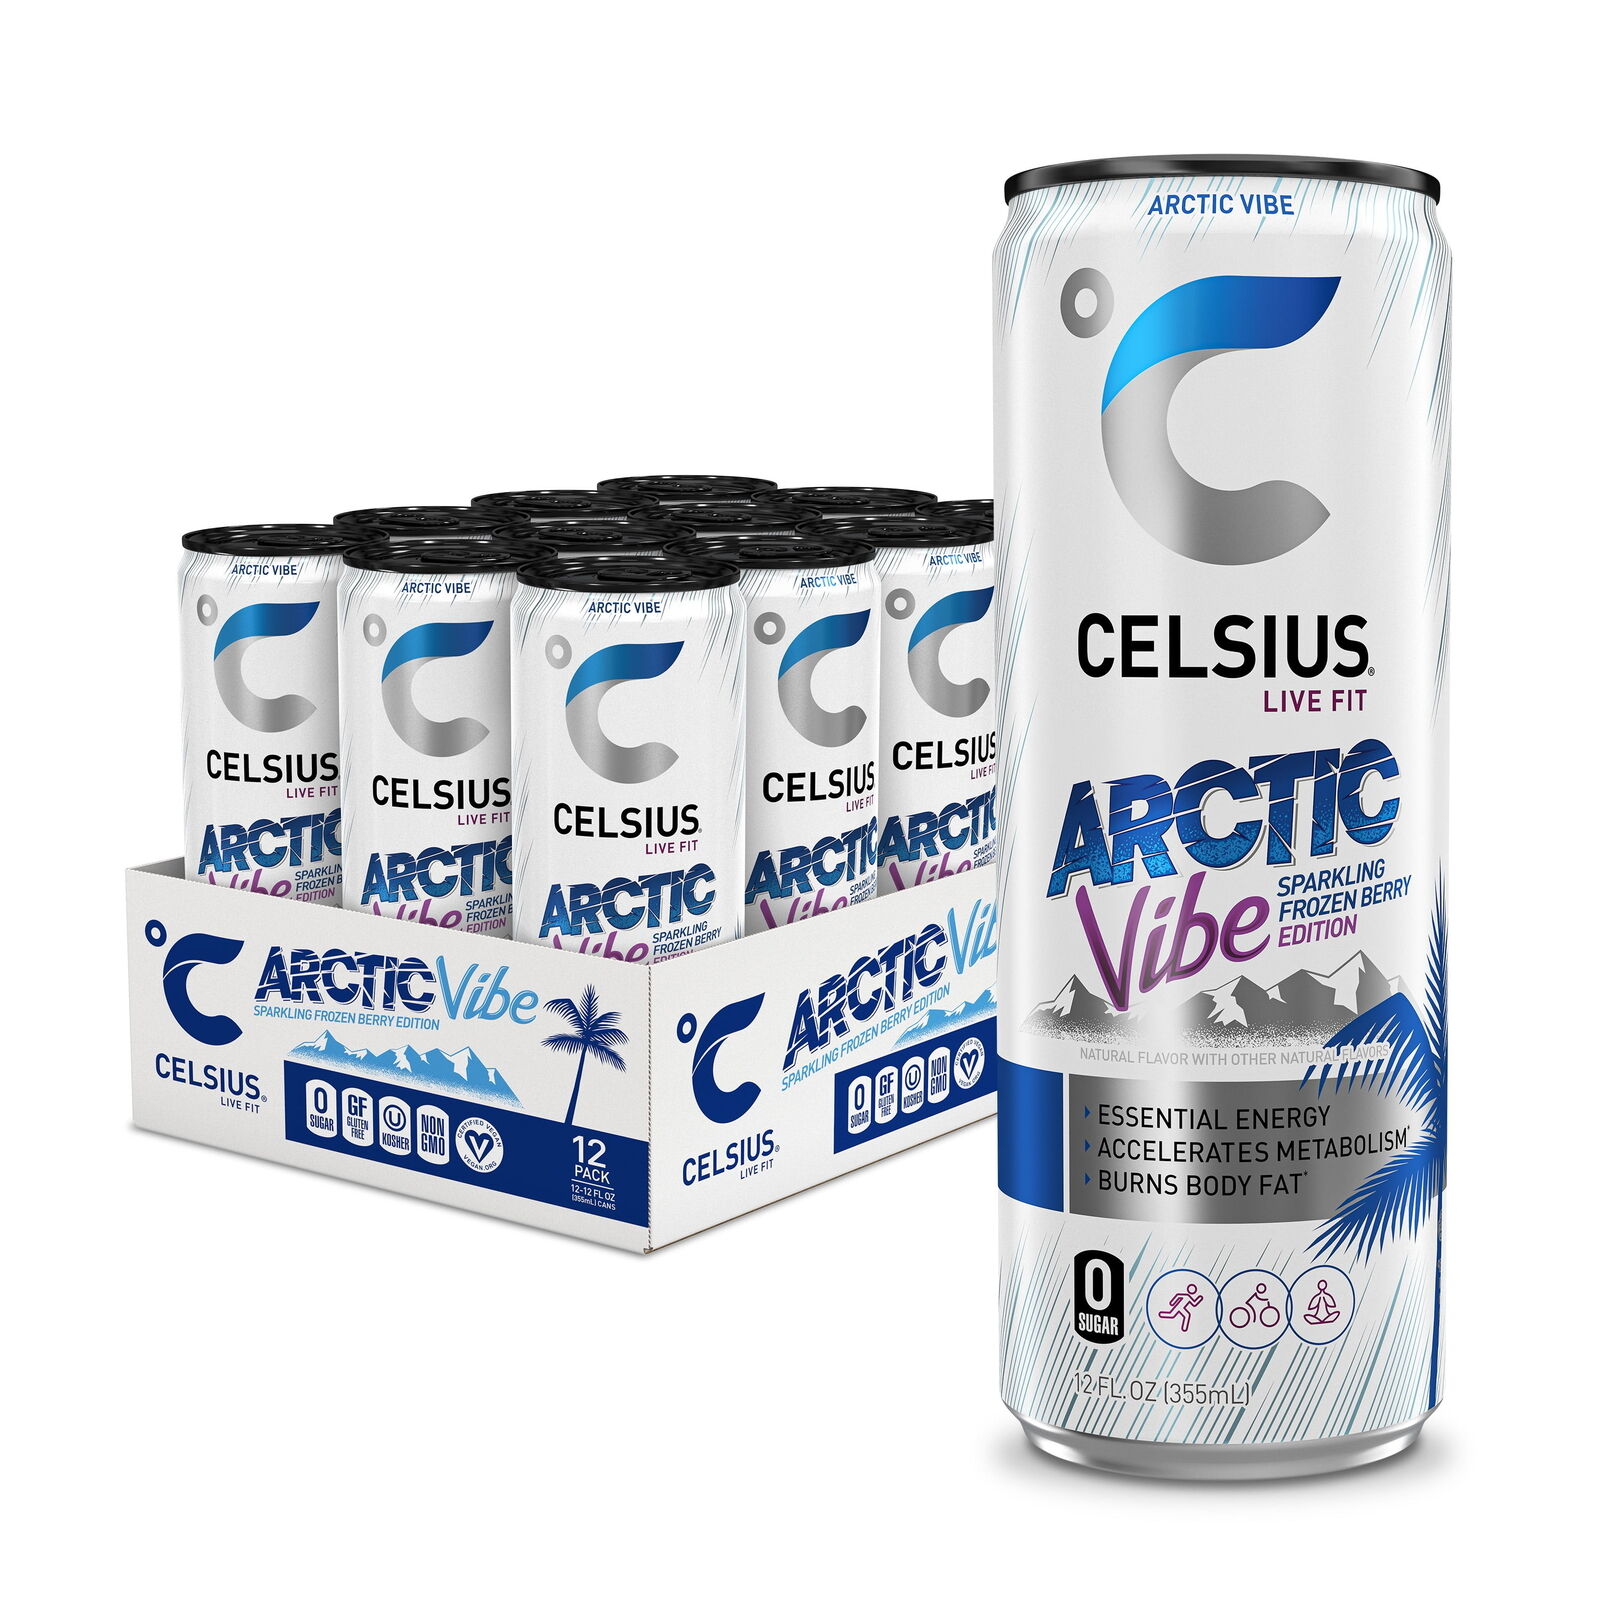 CELSIUS Sparkling Arctic Vibe, Functional Essential Energy Drink 12 fl oz Can